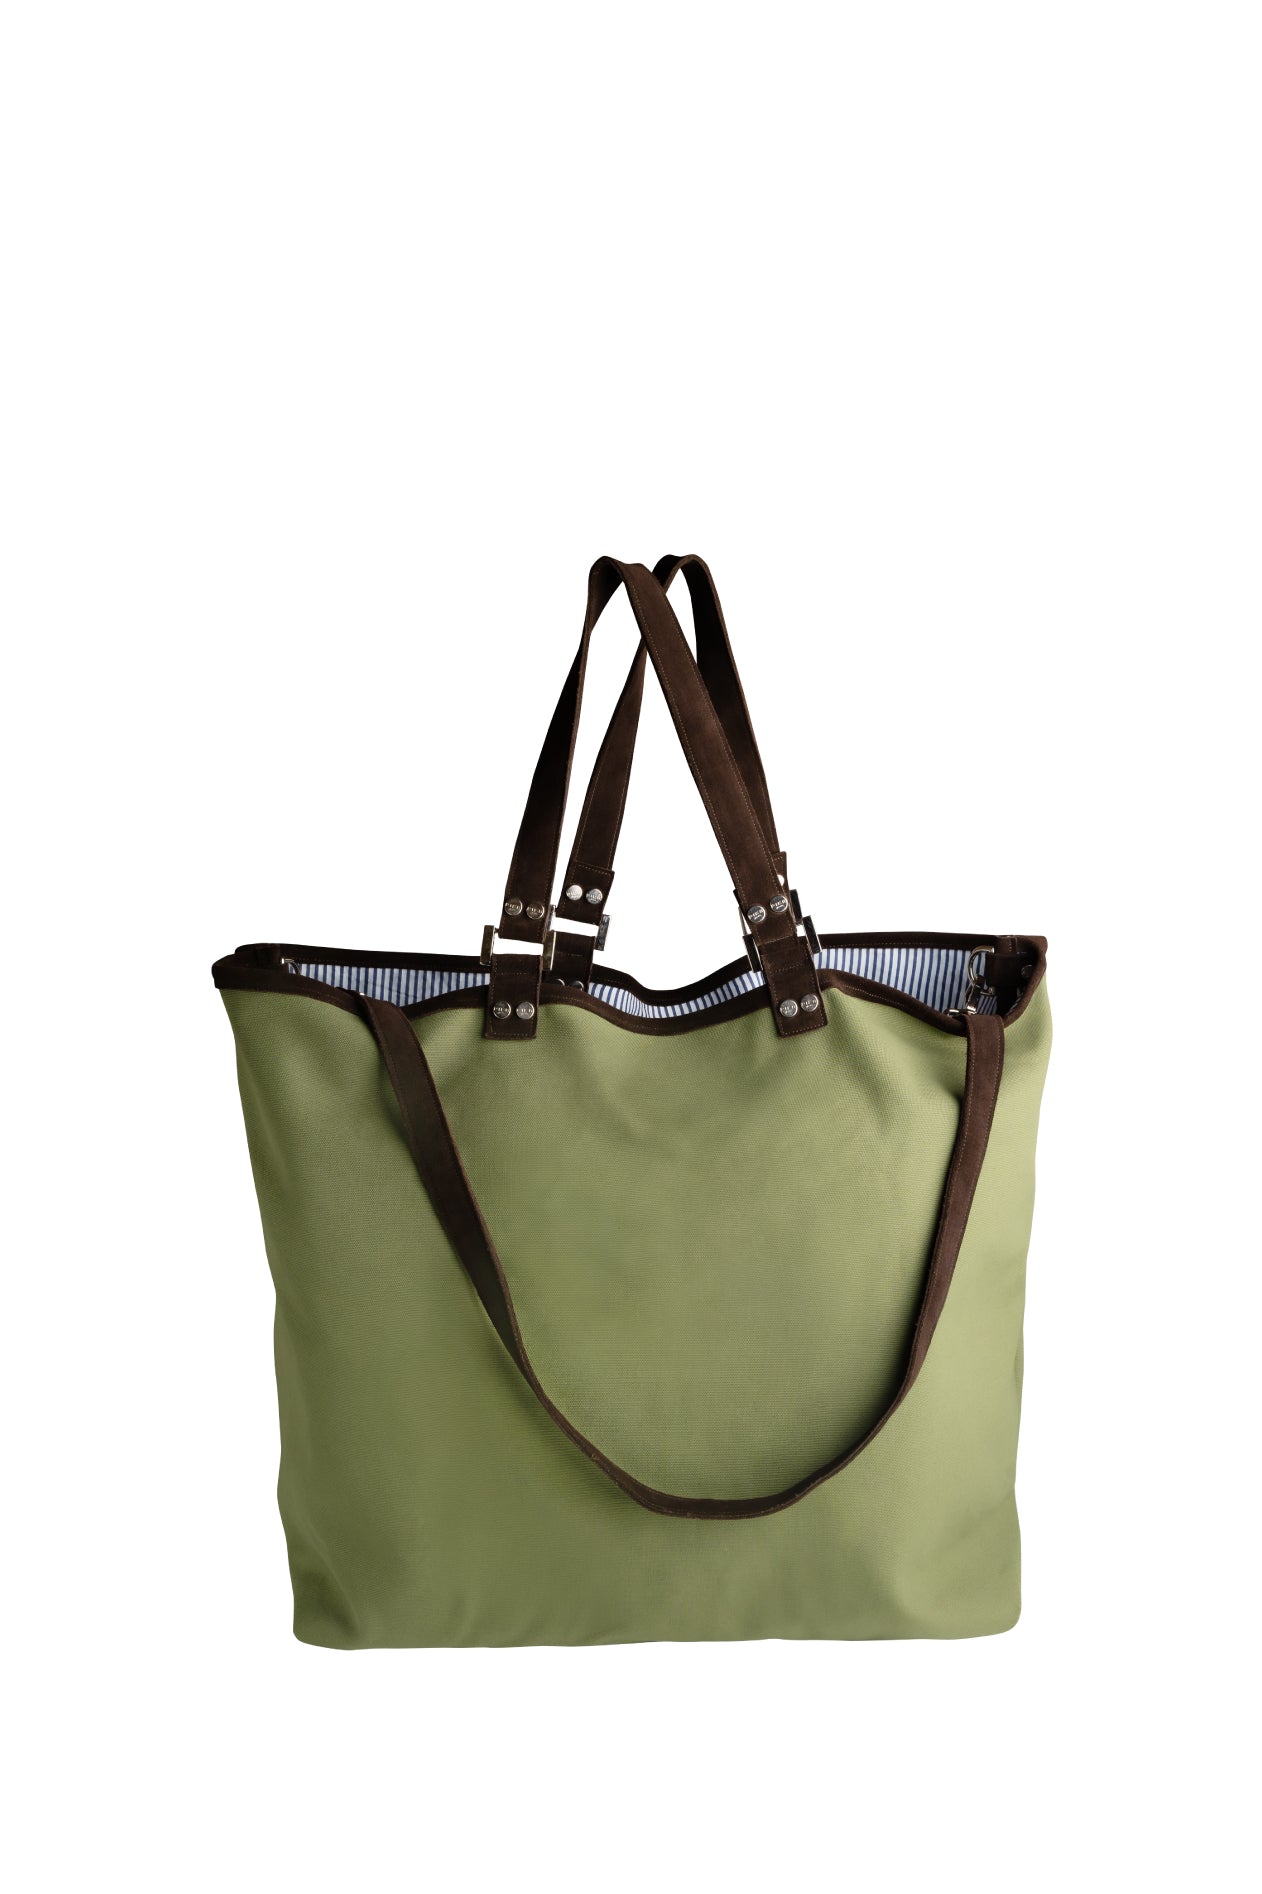 SALINA TOTE CANVAS MILITARY WITH SEERSUCKER BLUE LINING-REVERSIBILE (SIZE M)